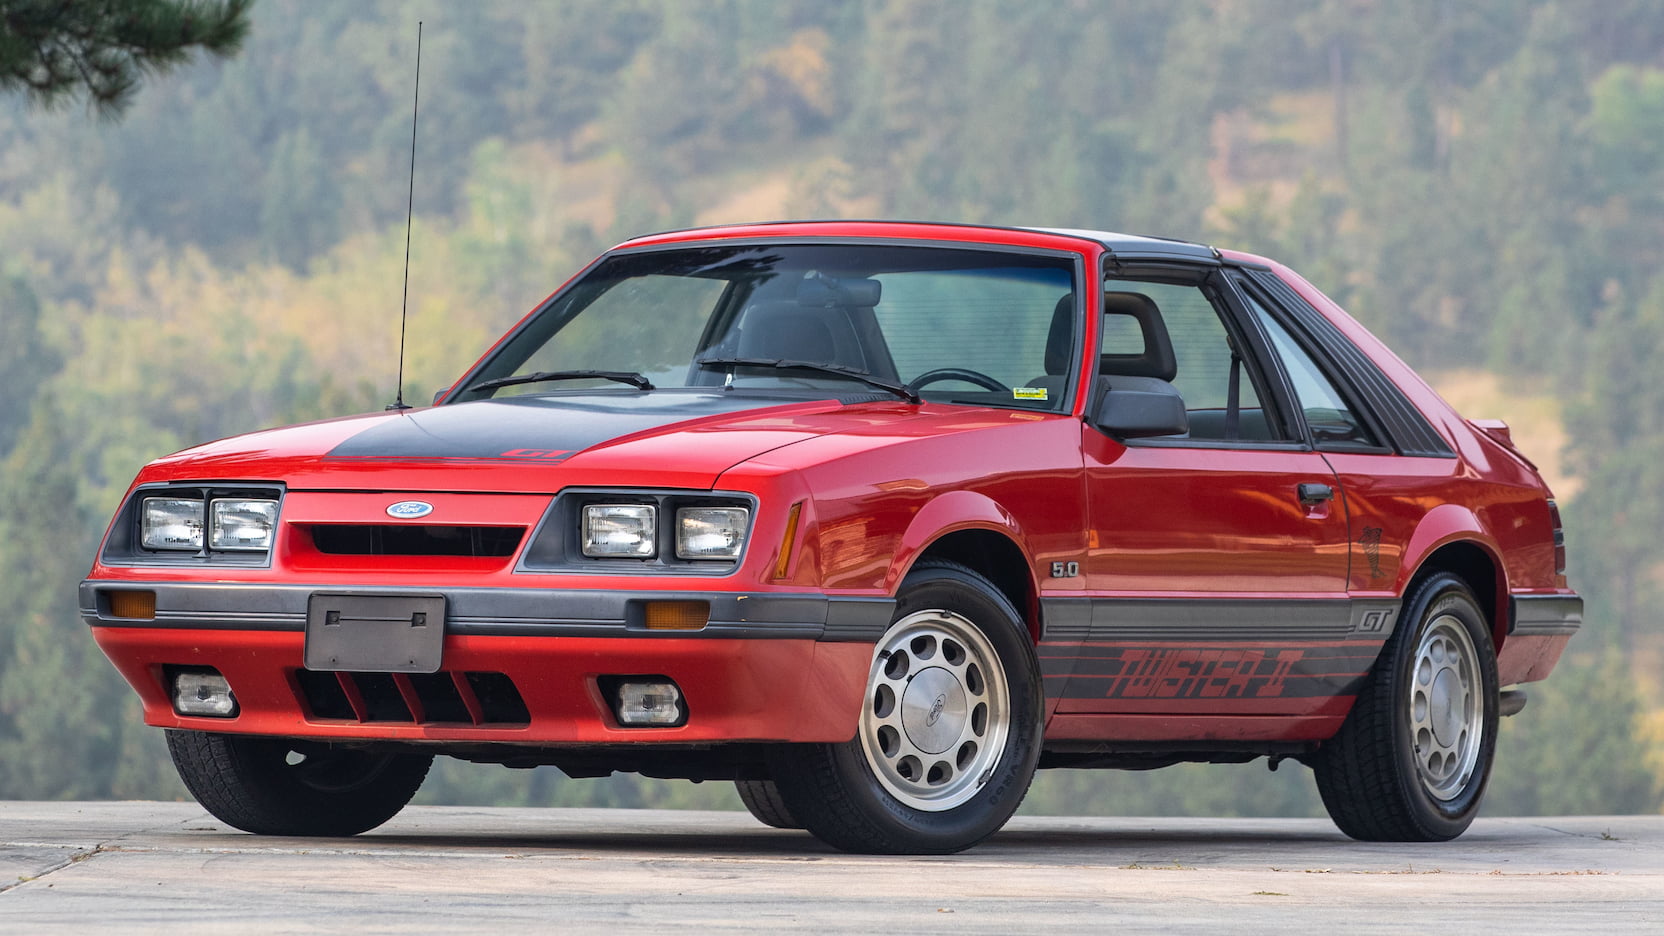 Mustang Of The Day: 1985 Ford Mustang Twister II Special